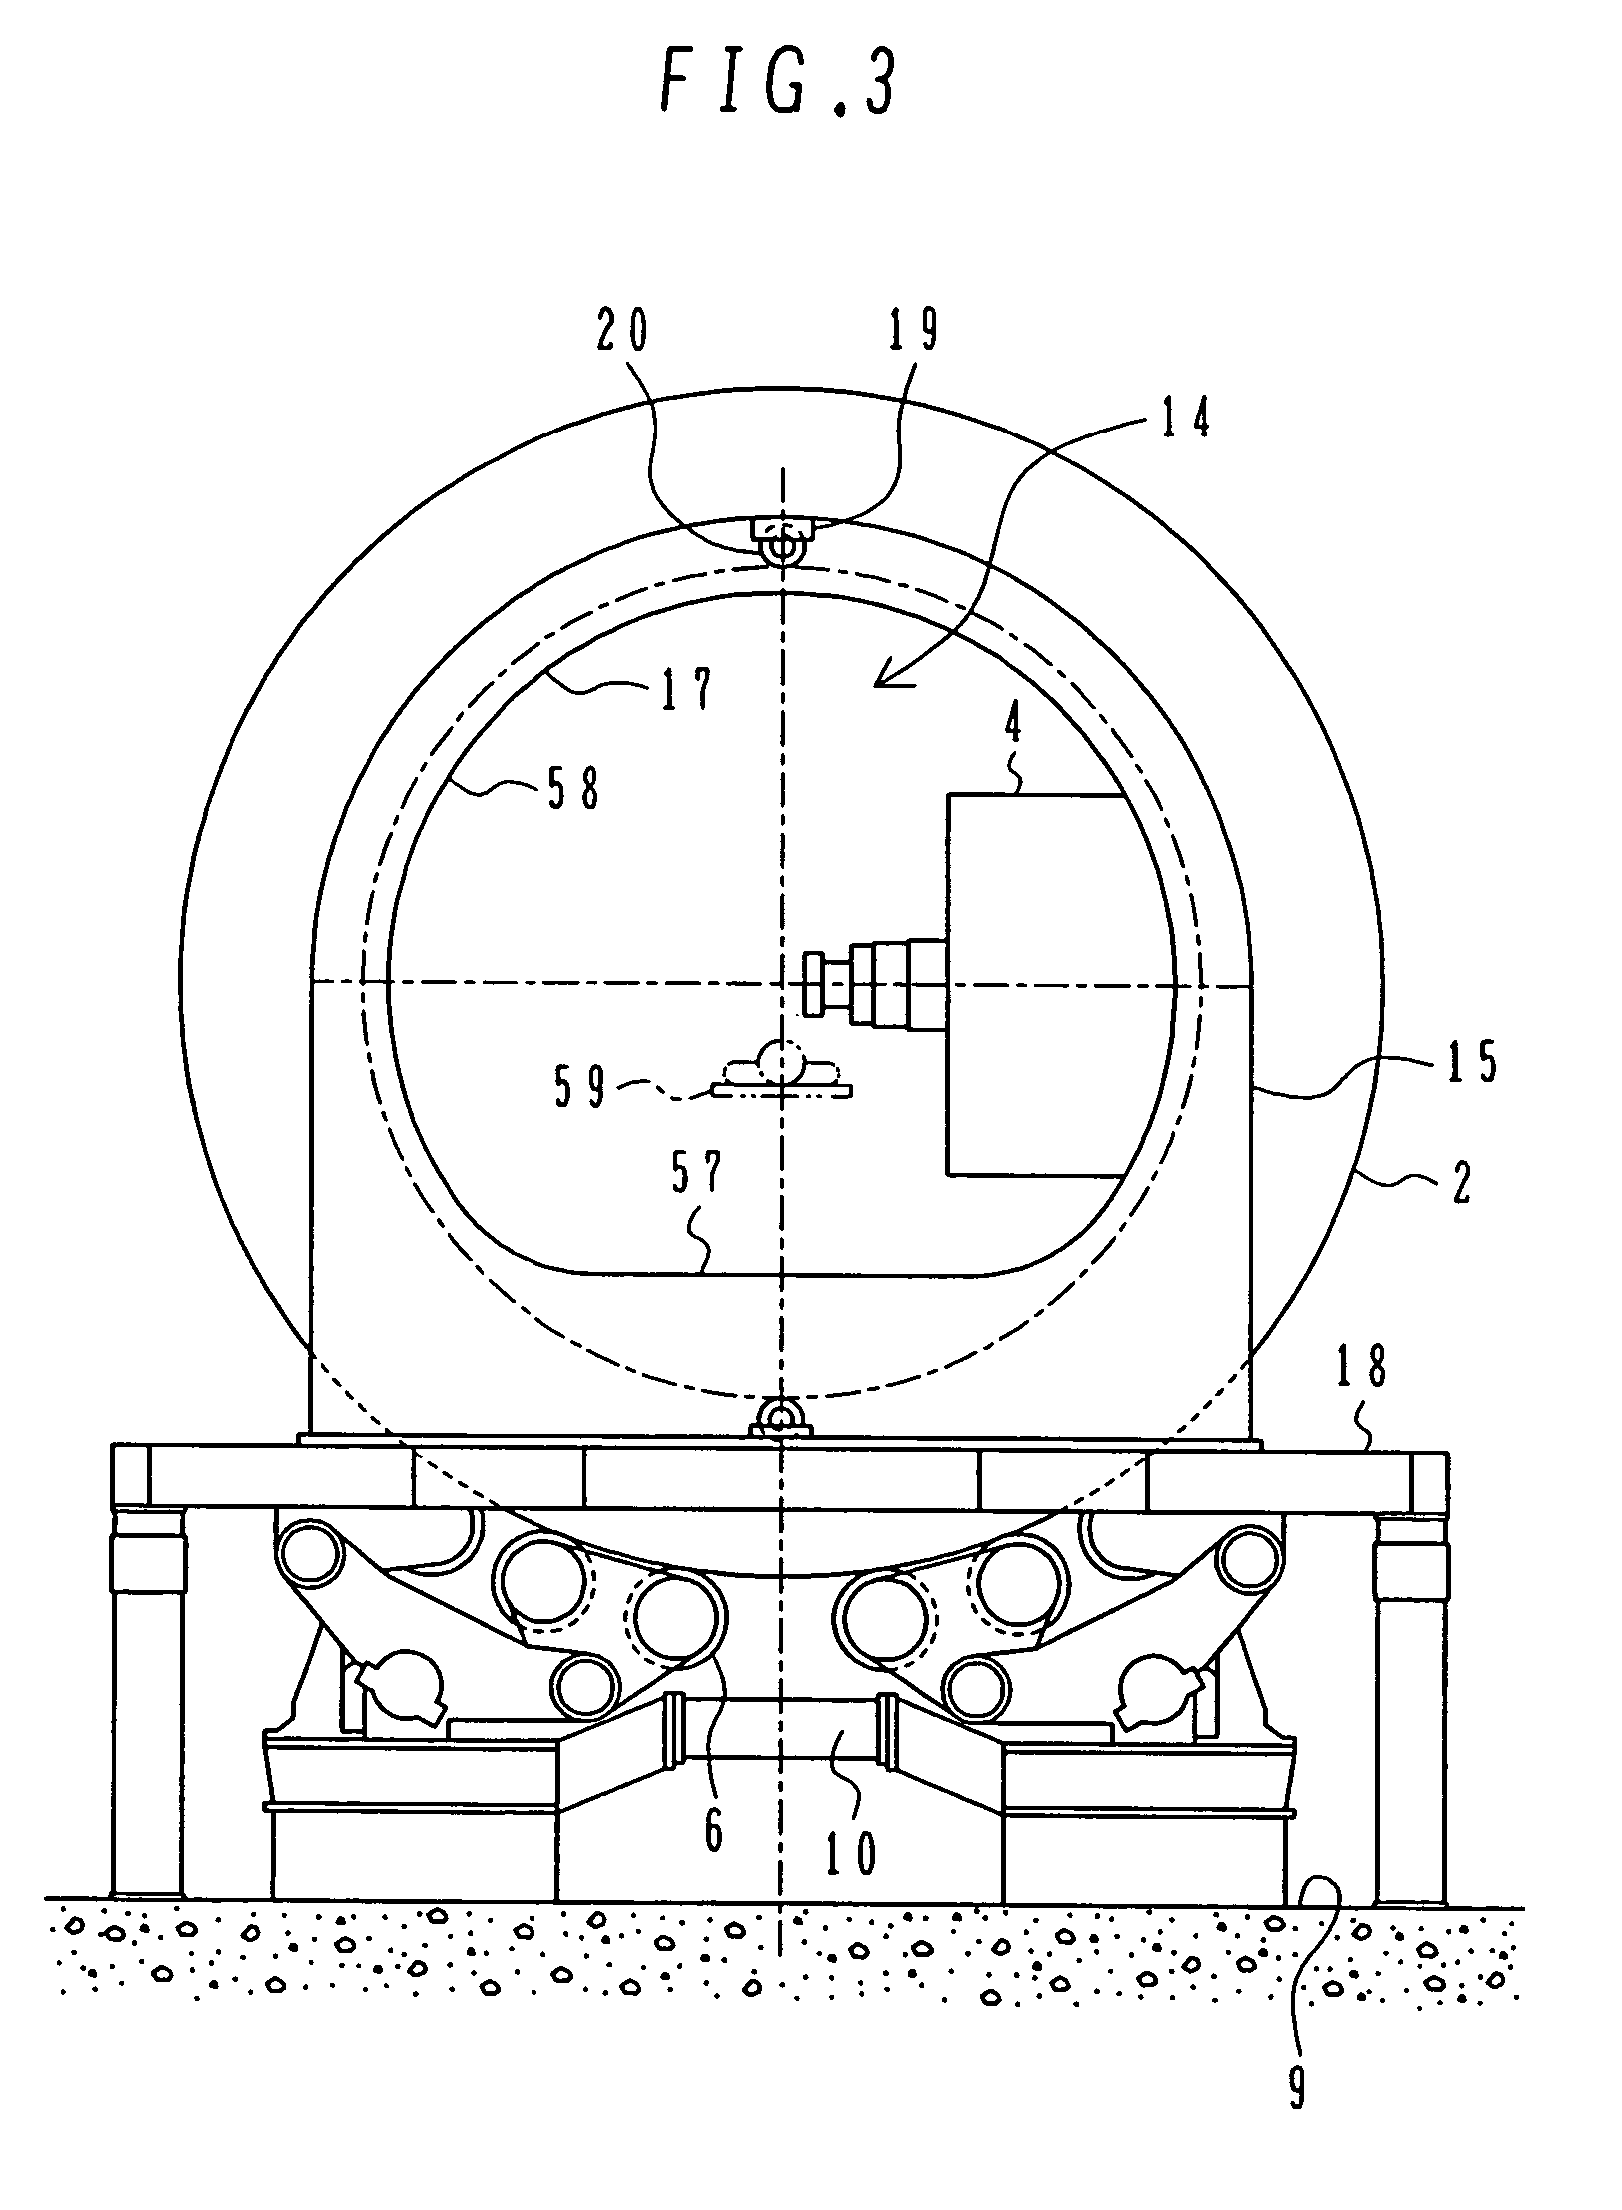 Medical particle irradiation apparatus